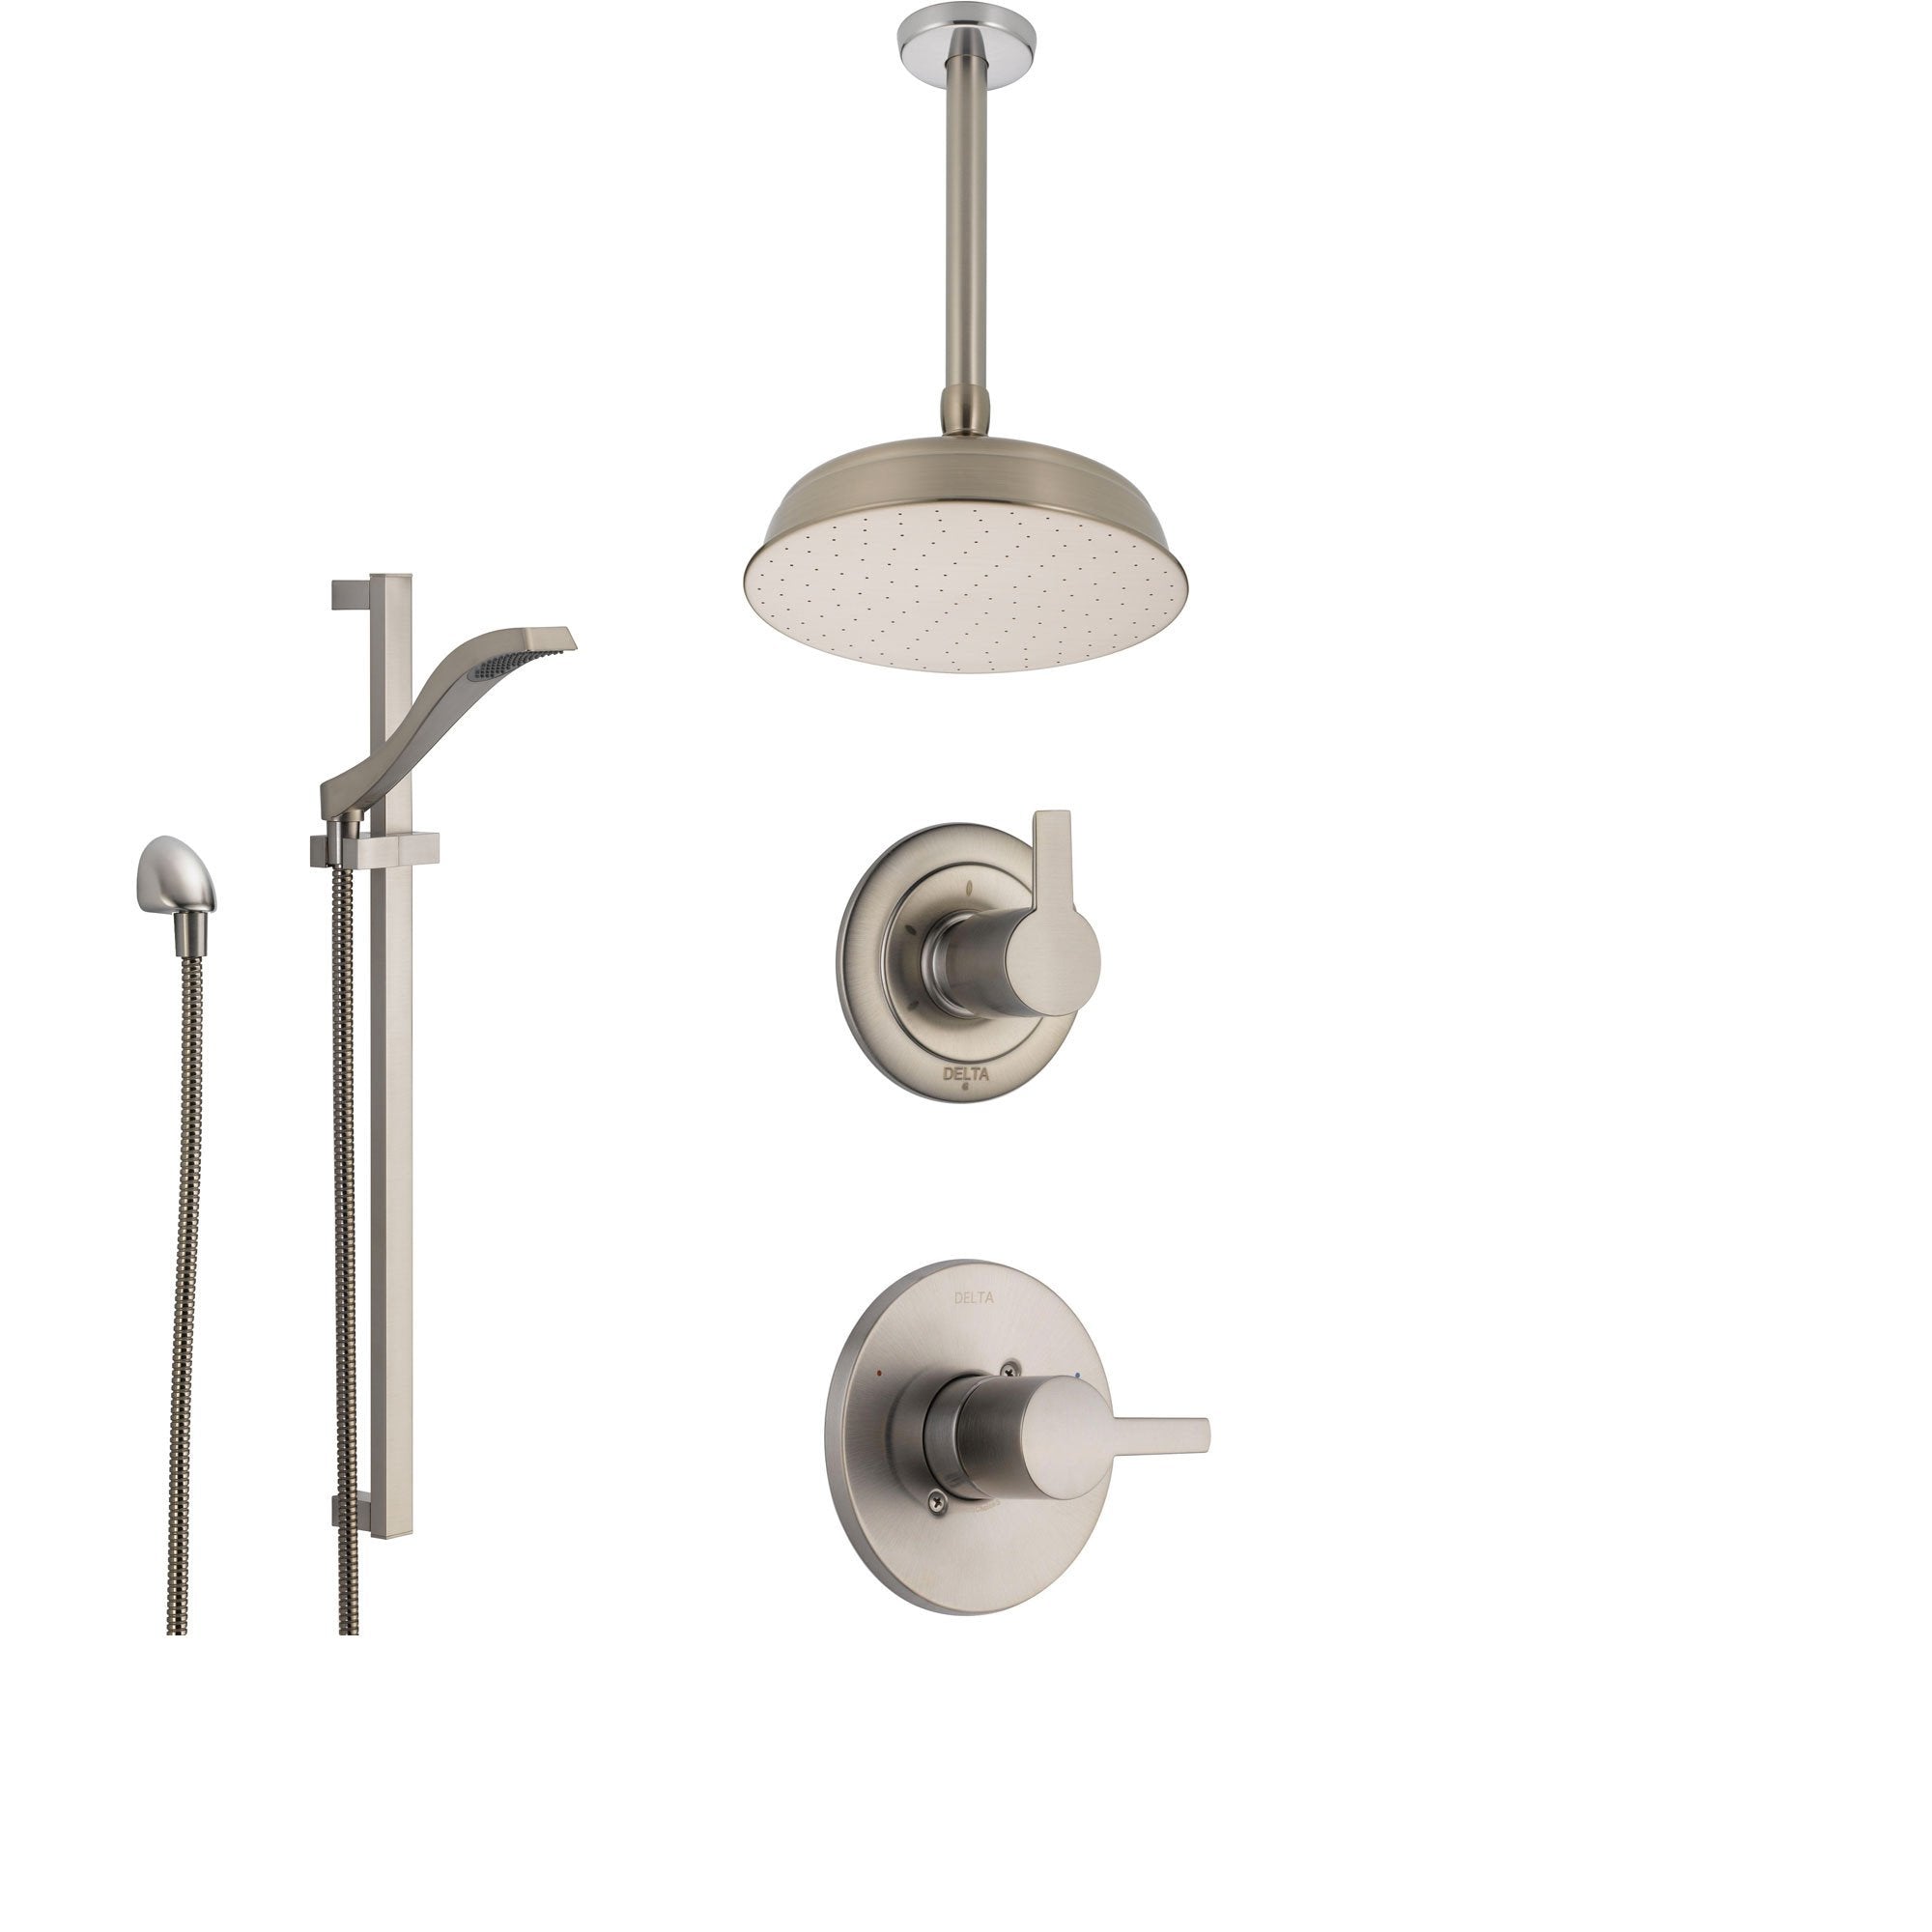 Delta Compel Stainless Steel Shower System with Normal Shower Handle, 3-setting Diverter, Large Round Ceiling Mount Showerhead, and Handheld Shower Spray SS146181SS